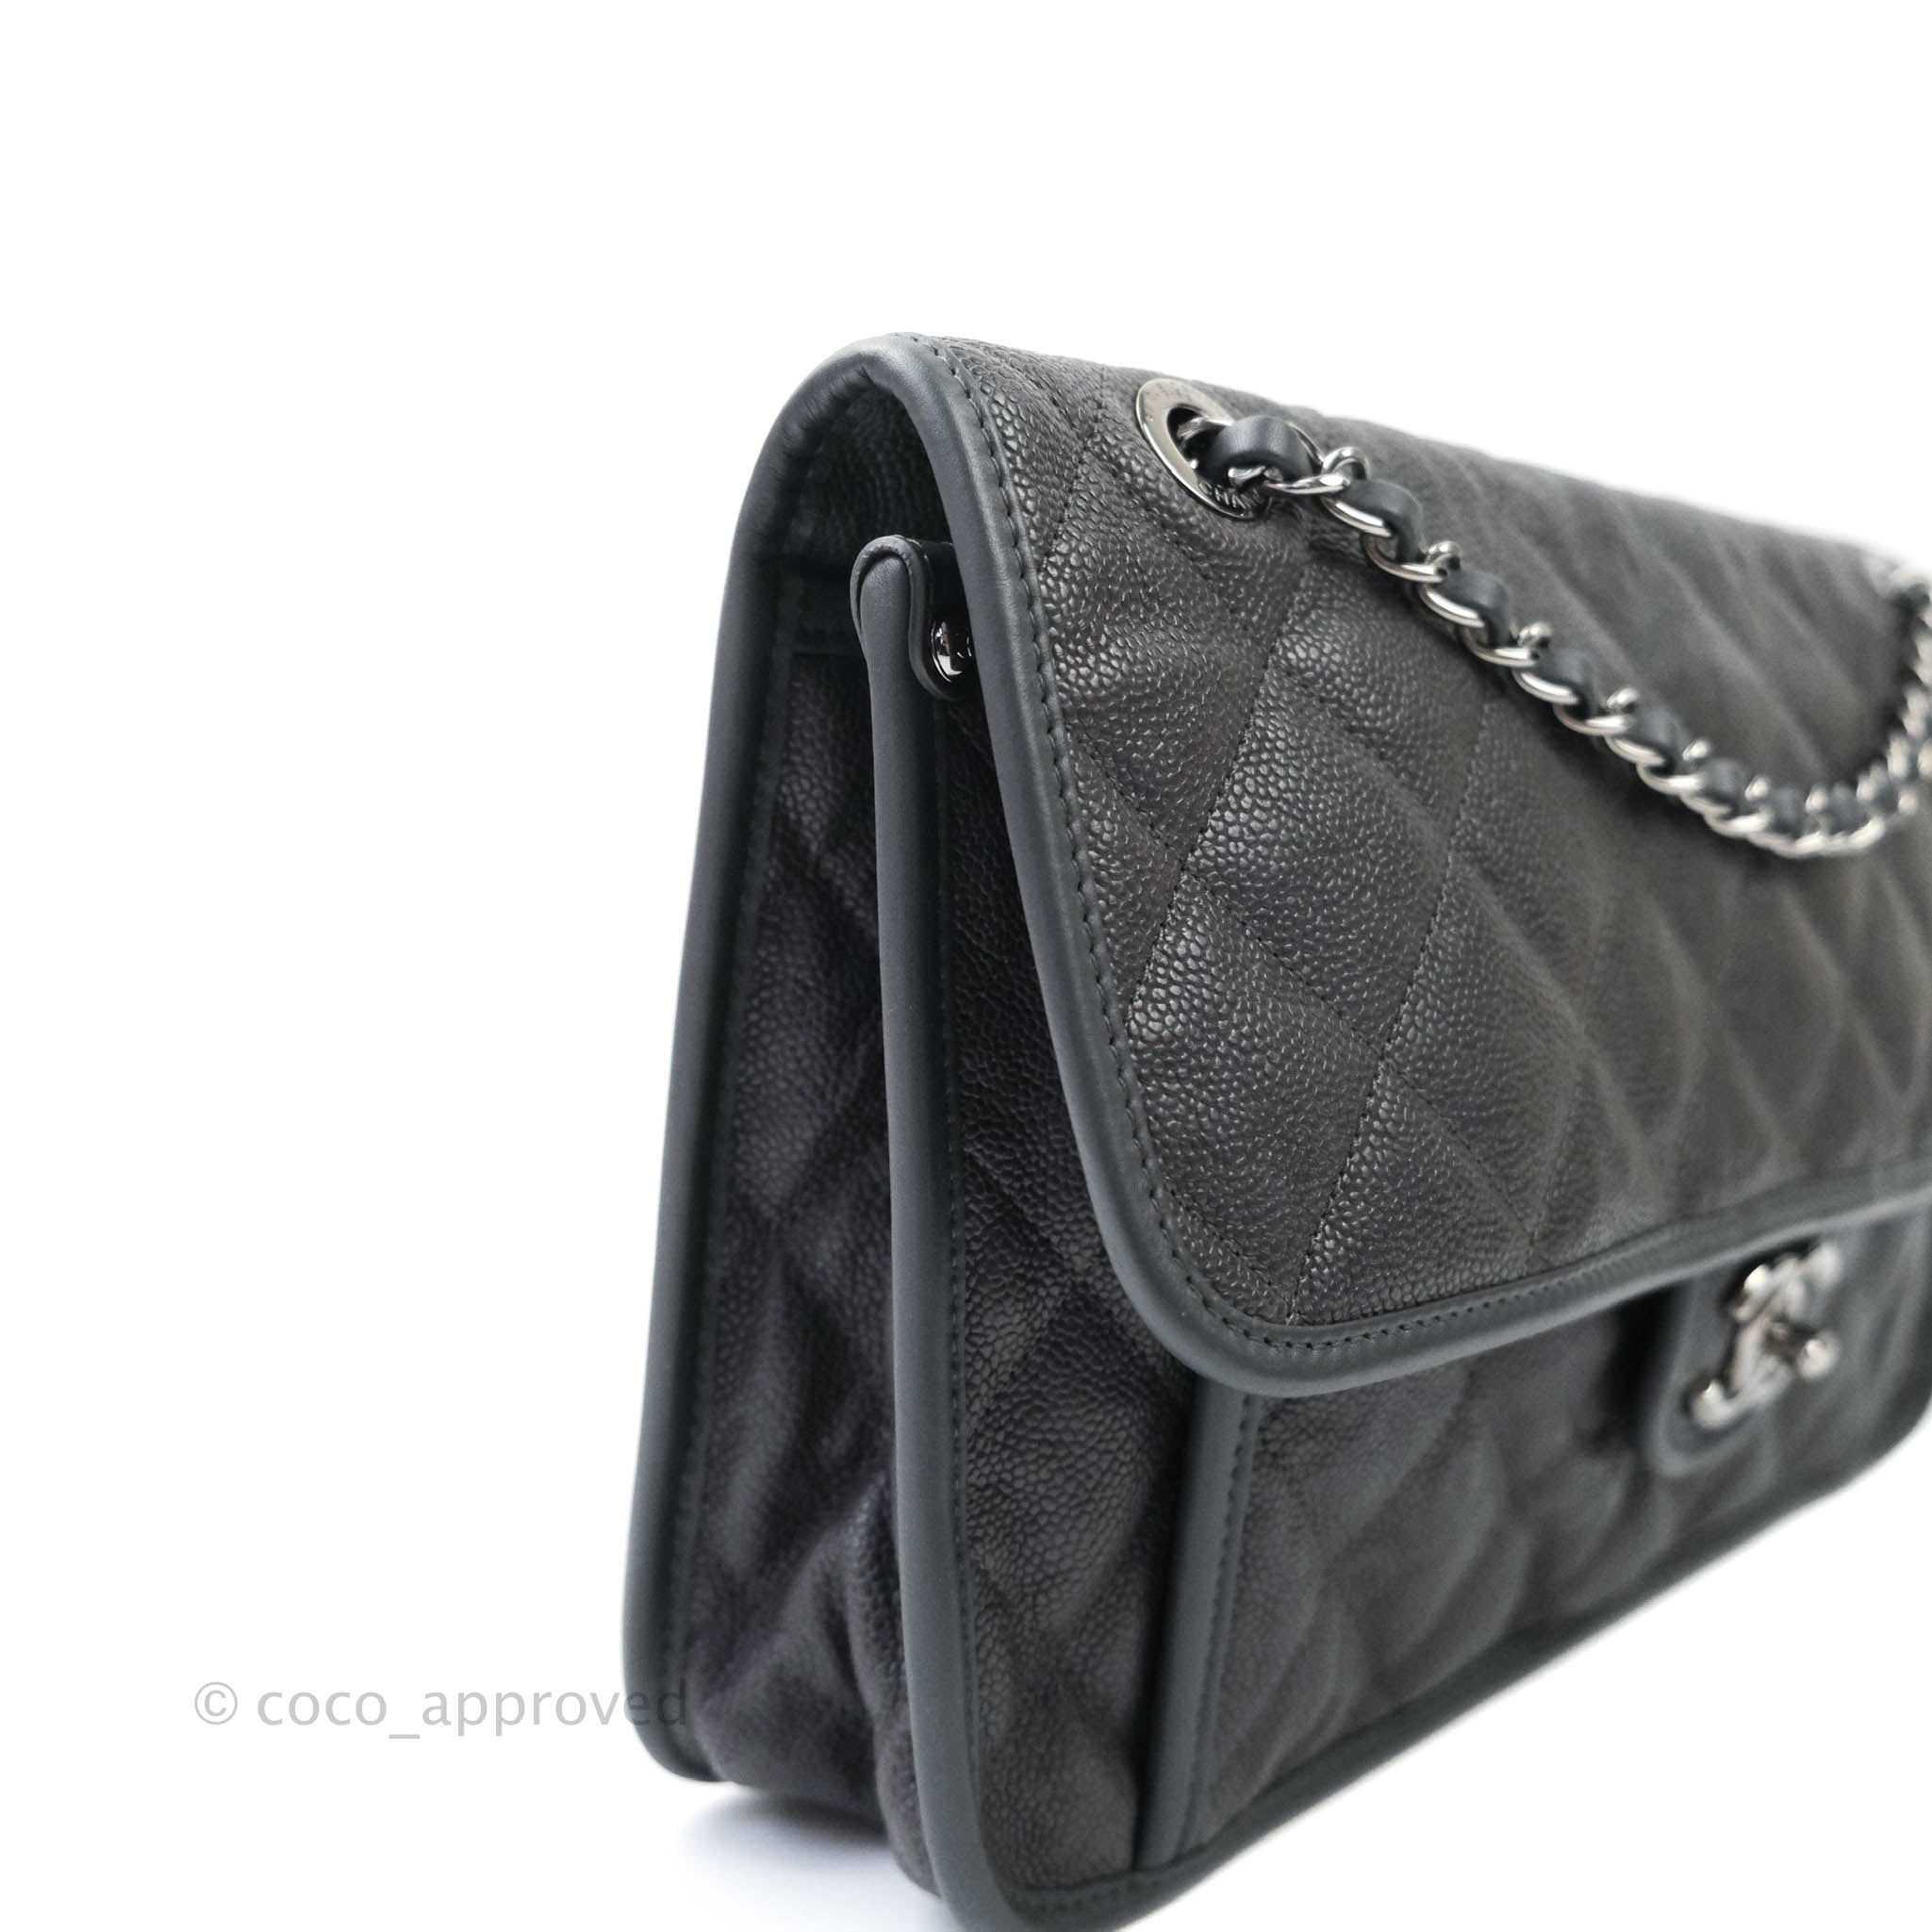 Chanel French Riviera Quilted Caviar Flap Bag – CLOSET1951SF